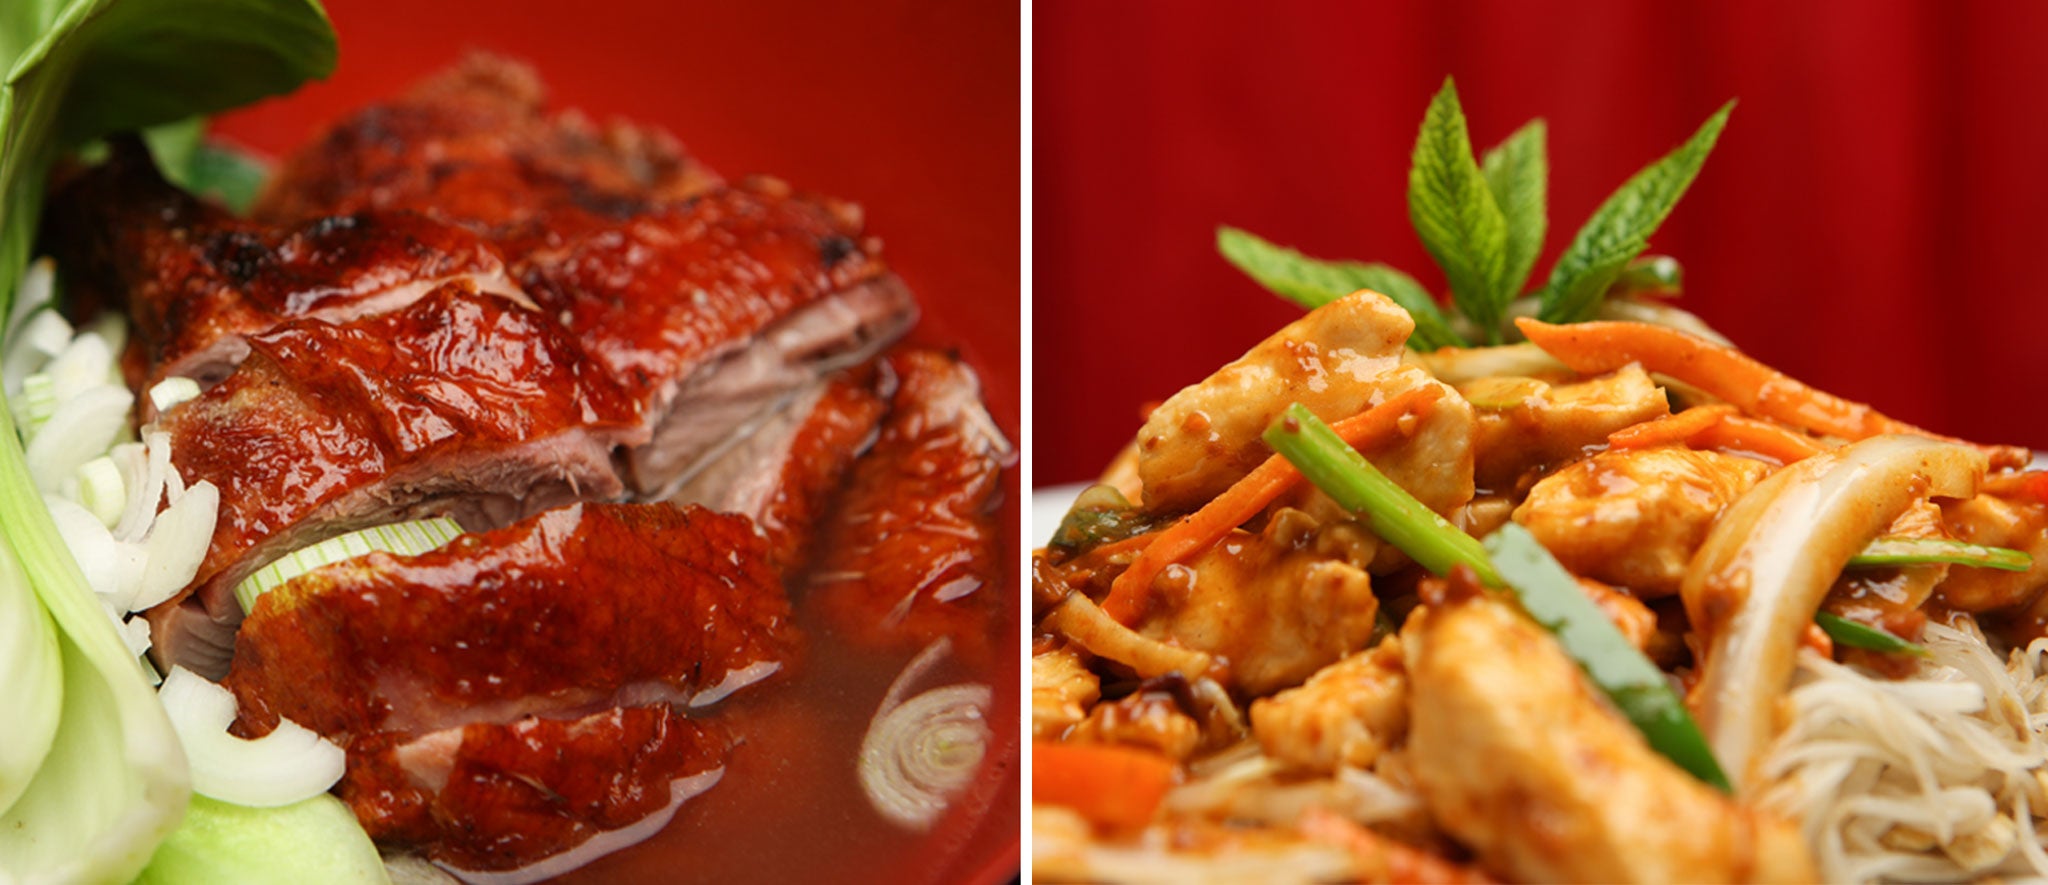 With the world preparing to see in the Chinese New Year tomorrow, TripAdvisor has revealed the top 10 Chinese restaurants in the UK